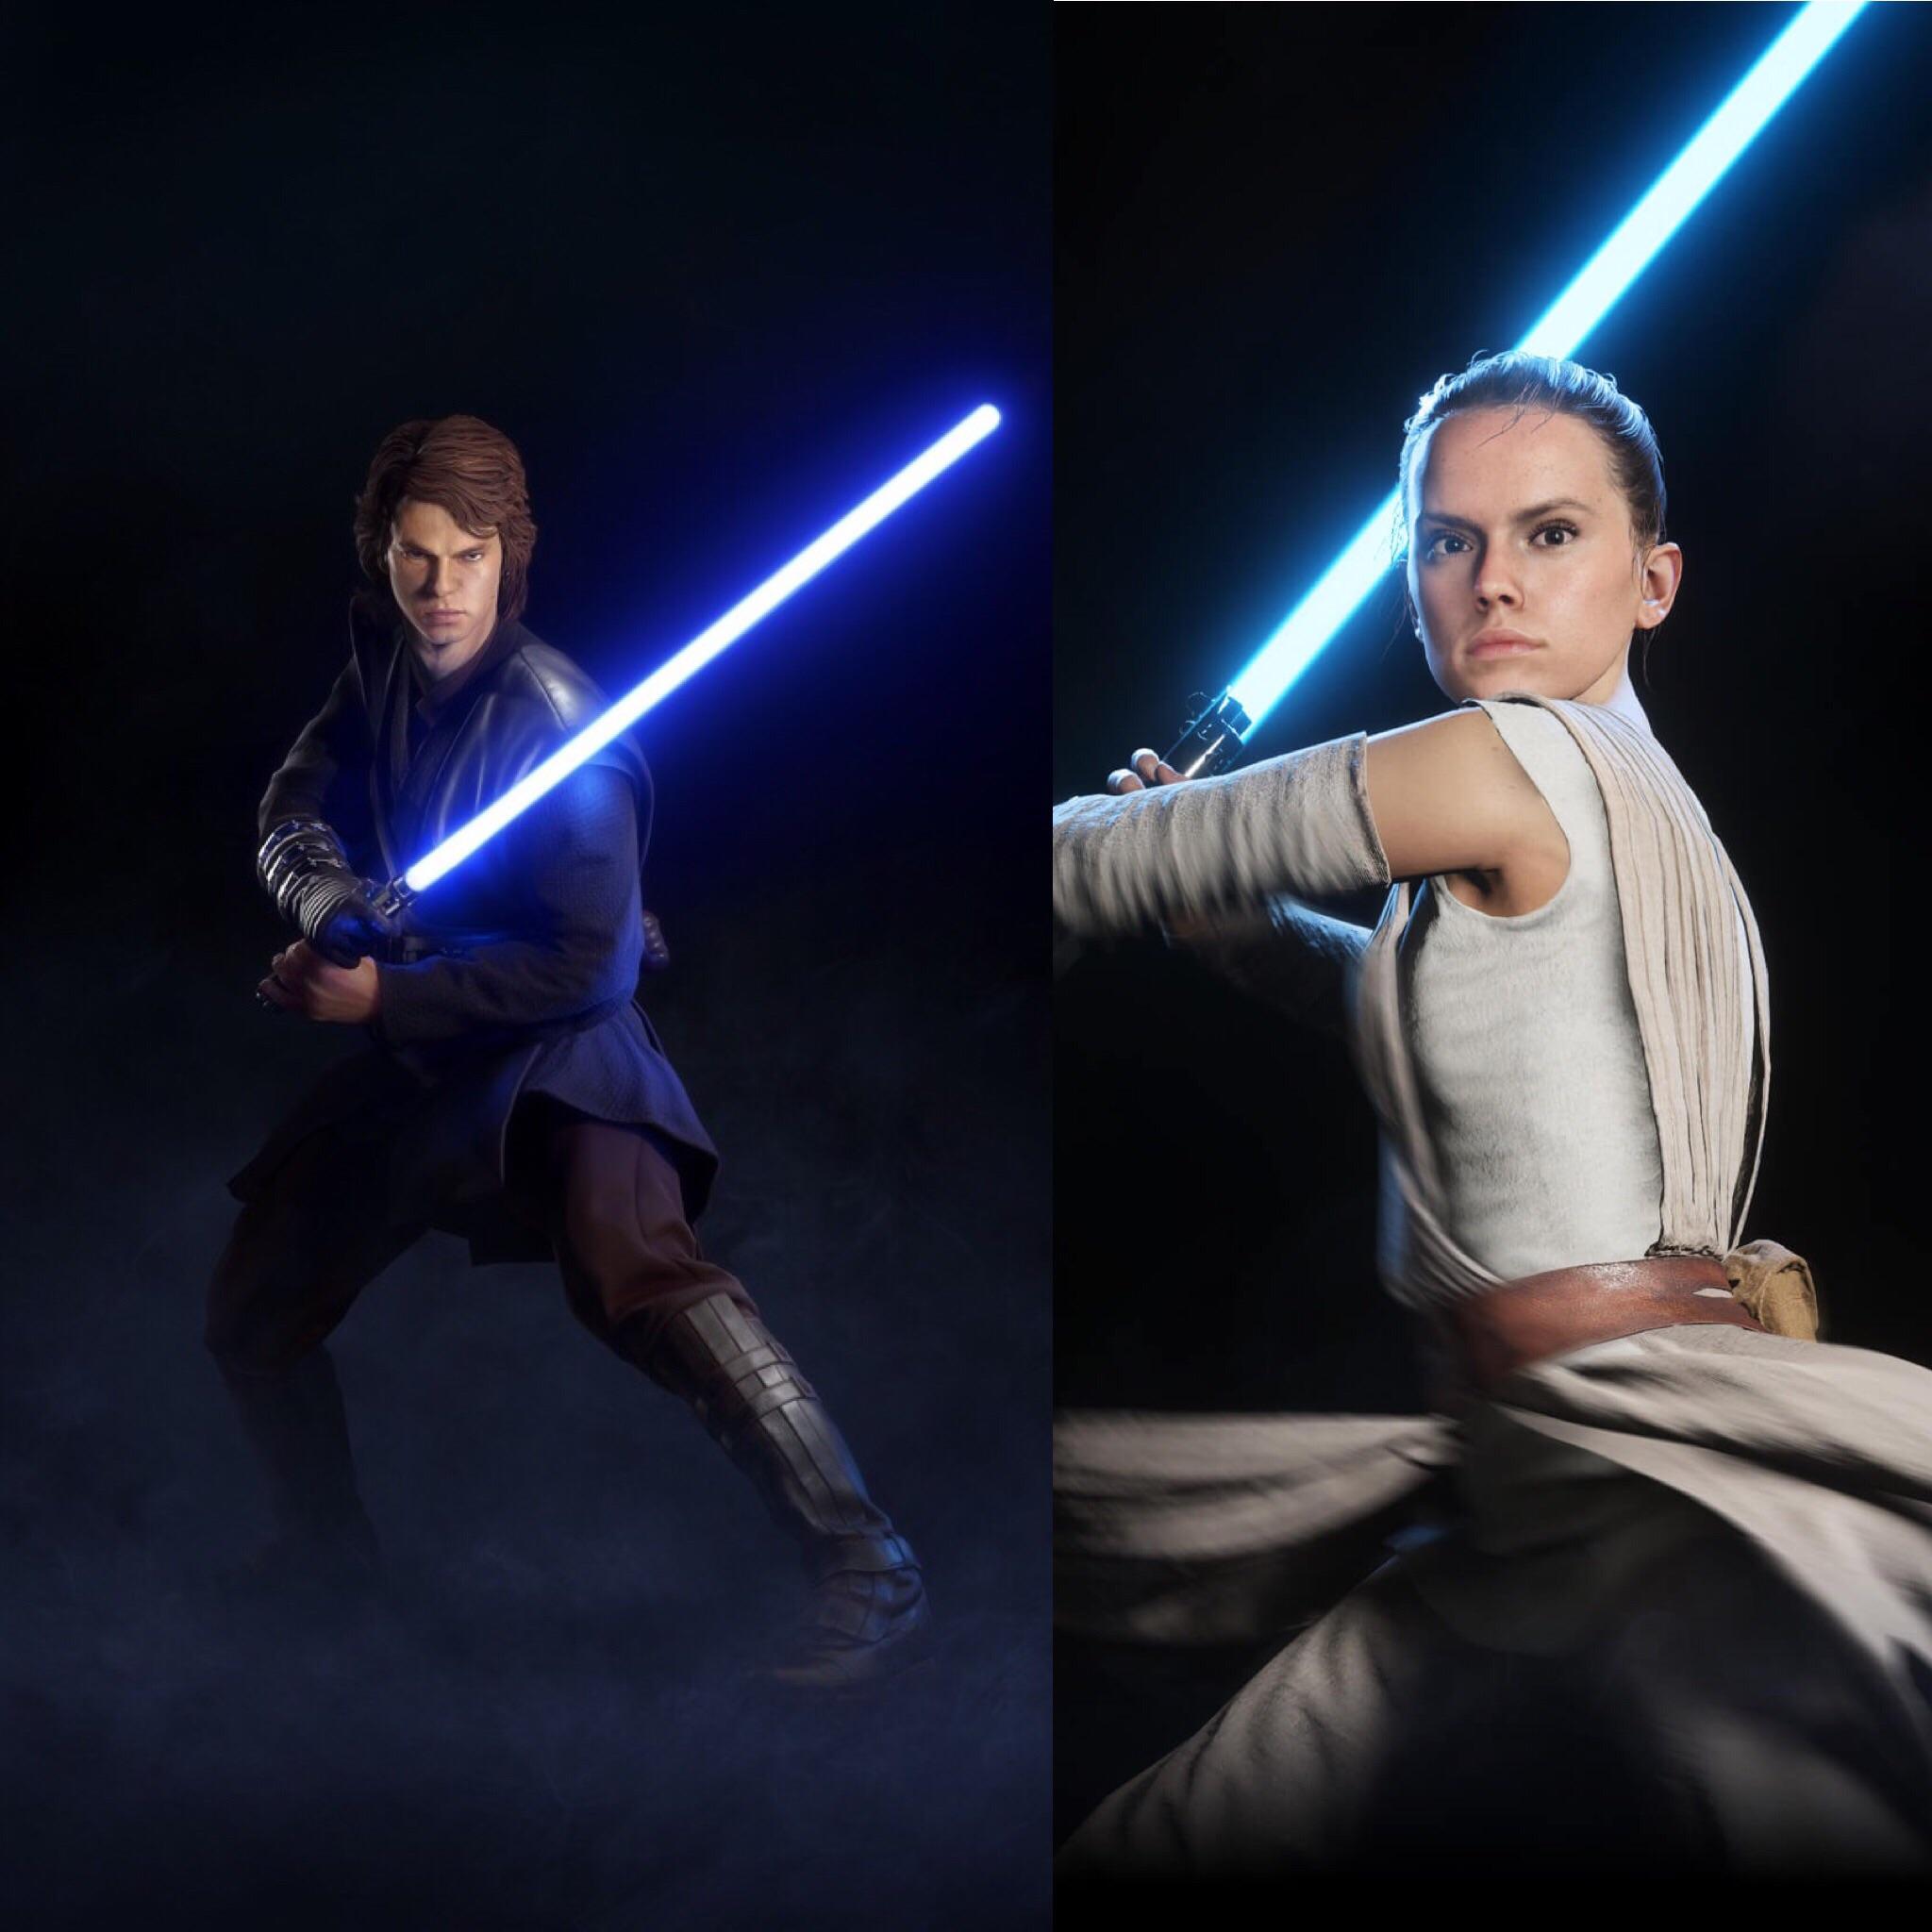 Anyone notice that Anakin and Rey have different saber colors?